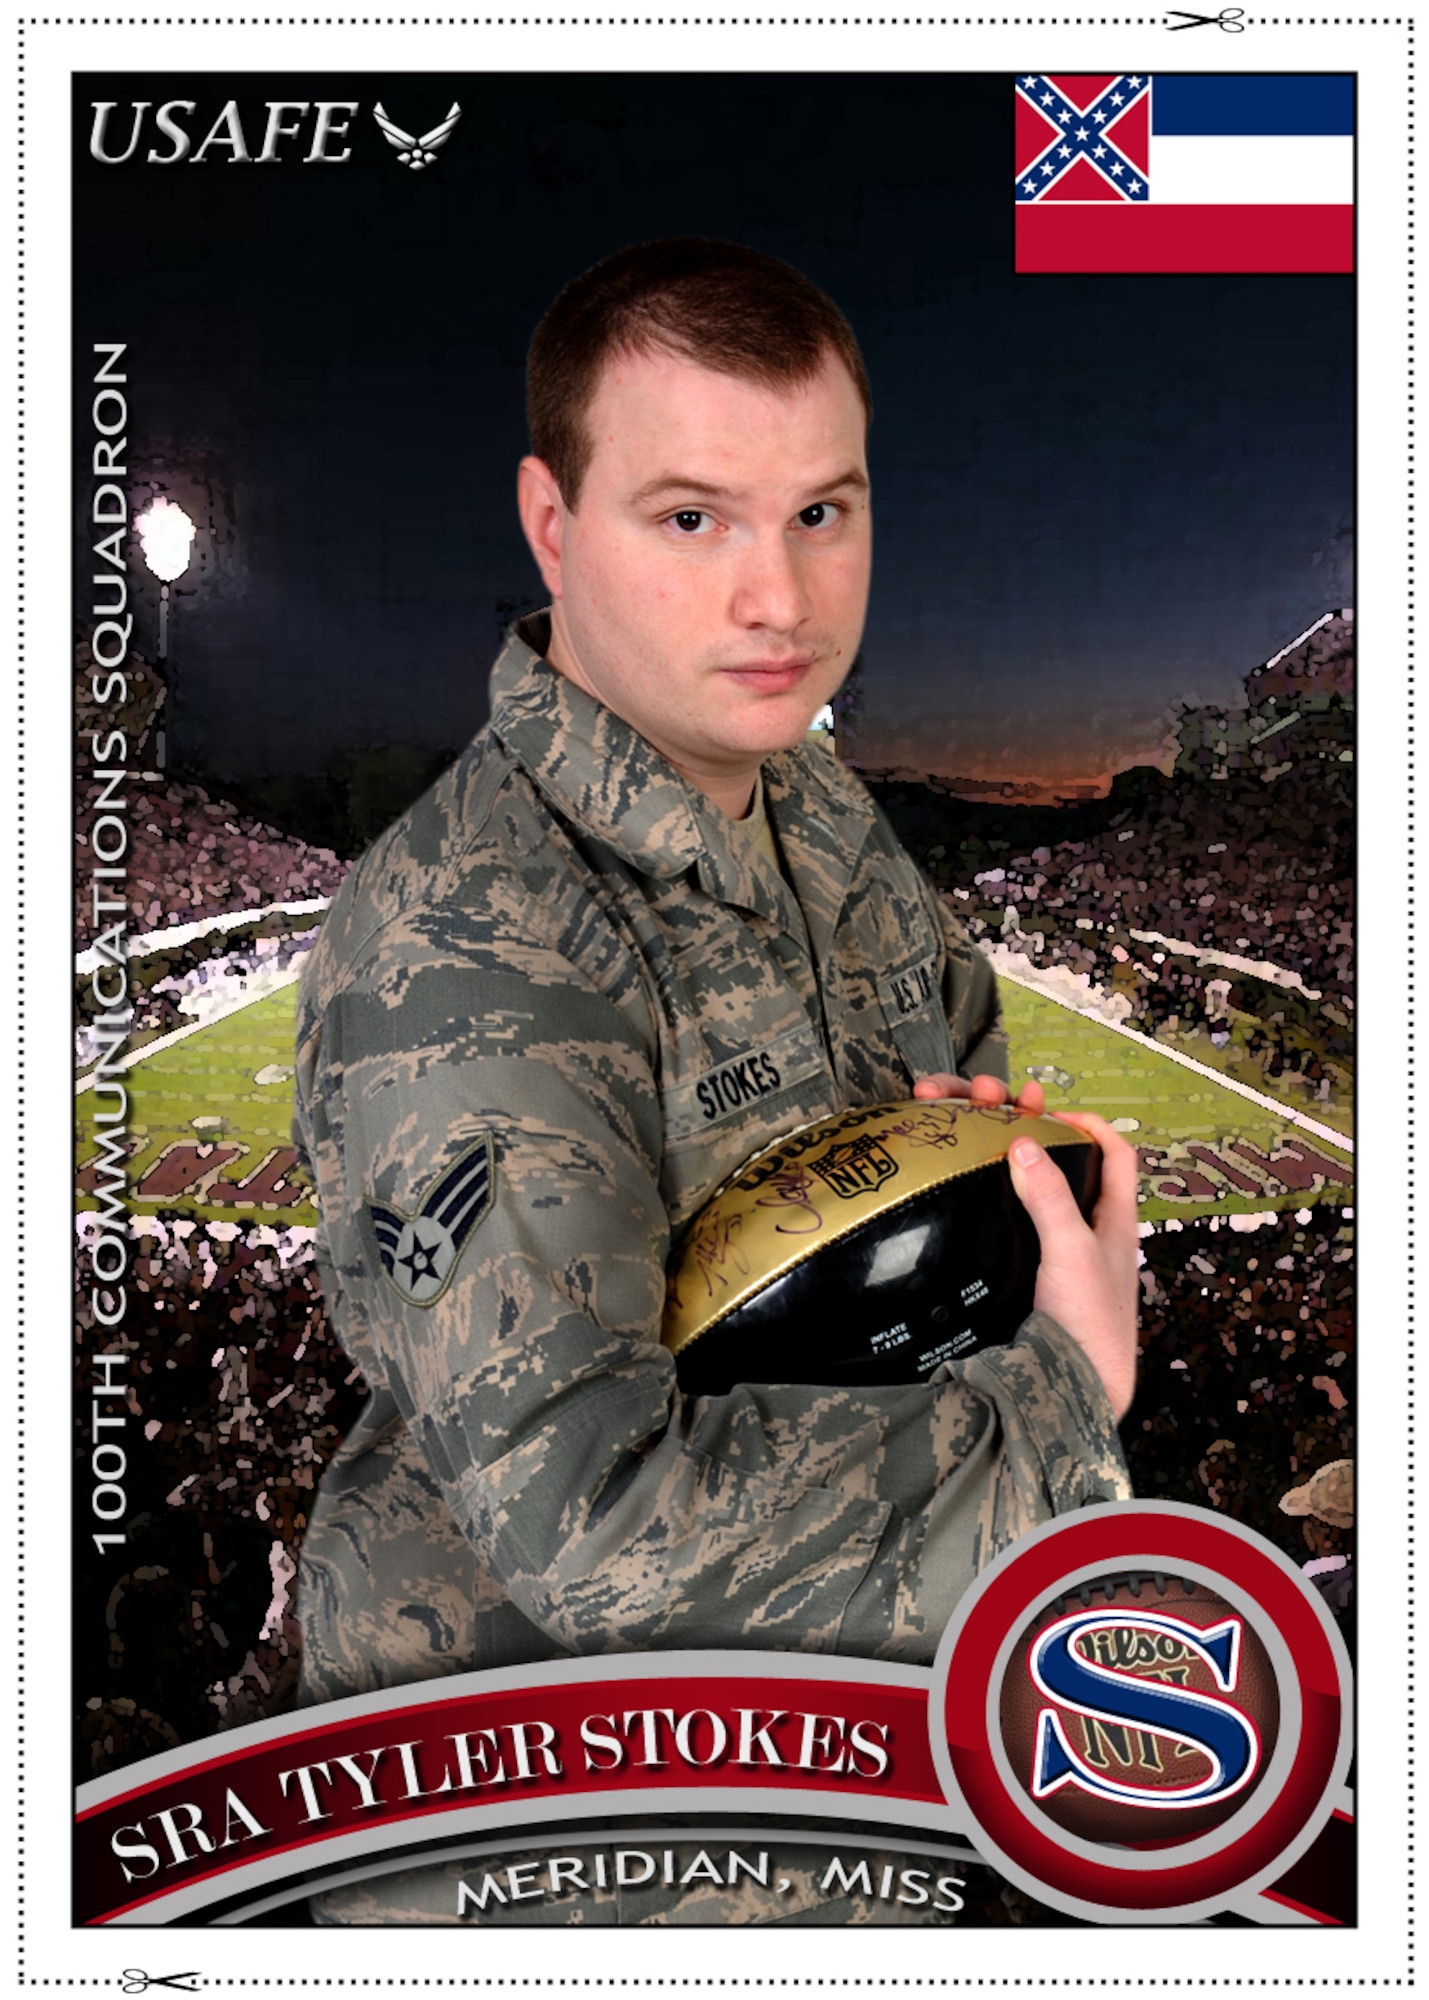 Senior Airman Tyler Stokes, 100th Communications Squadron, describes how he believes standing as one, the Air Force is strong, and relays his excitement for the upcoming Olympic Games. Stokes is an 100th CS communications security accountant and hails from Meridian, Miss. Here’s what he had to say about the Games: “The fact that the Olympic Games have their roots in Ancient Greece is what gives me the most pride. I have an interest in history of all kinds, and the fact that America (one of the youngest nations relative to the history of the world) is participating in one of the world’s longest, oldest, and most prestigious competitions with athletes from all over the world is pretty awe inspiring.” (U.S. Air Force photo illustration/Tony Dineen)